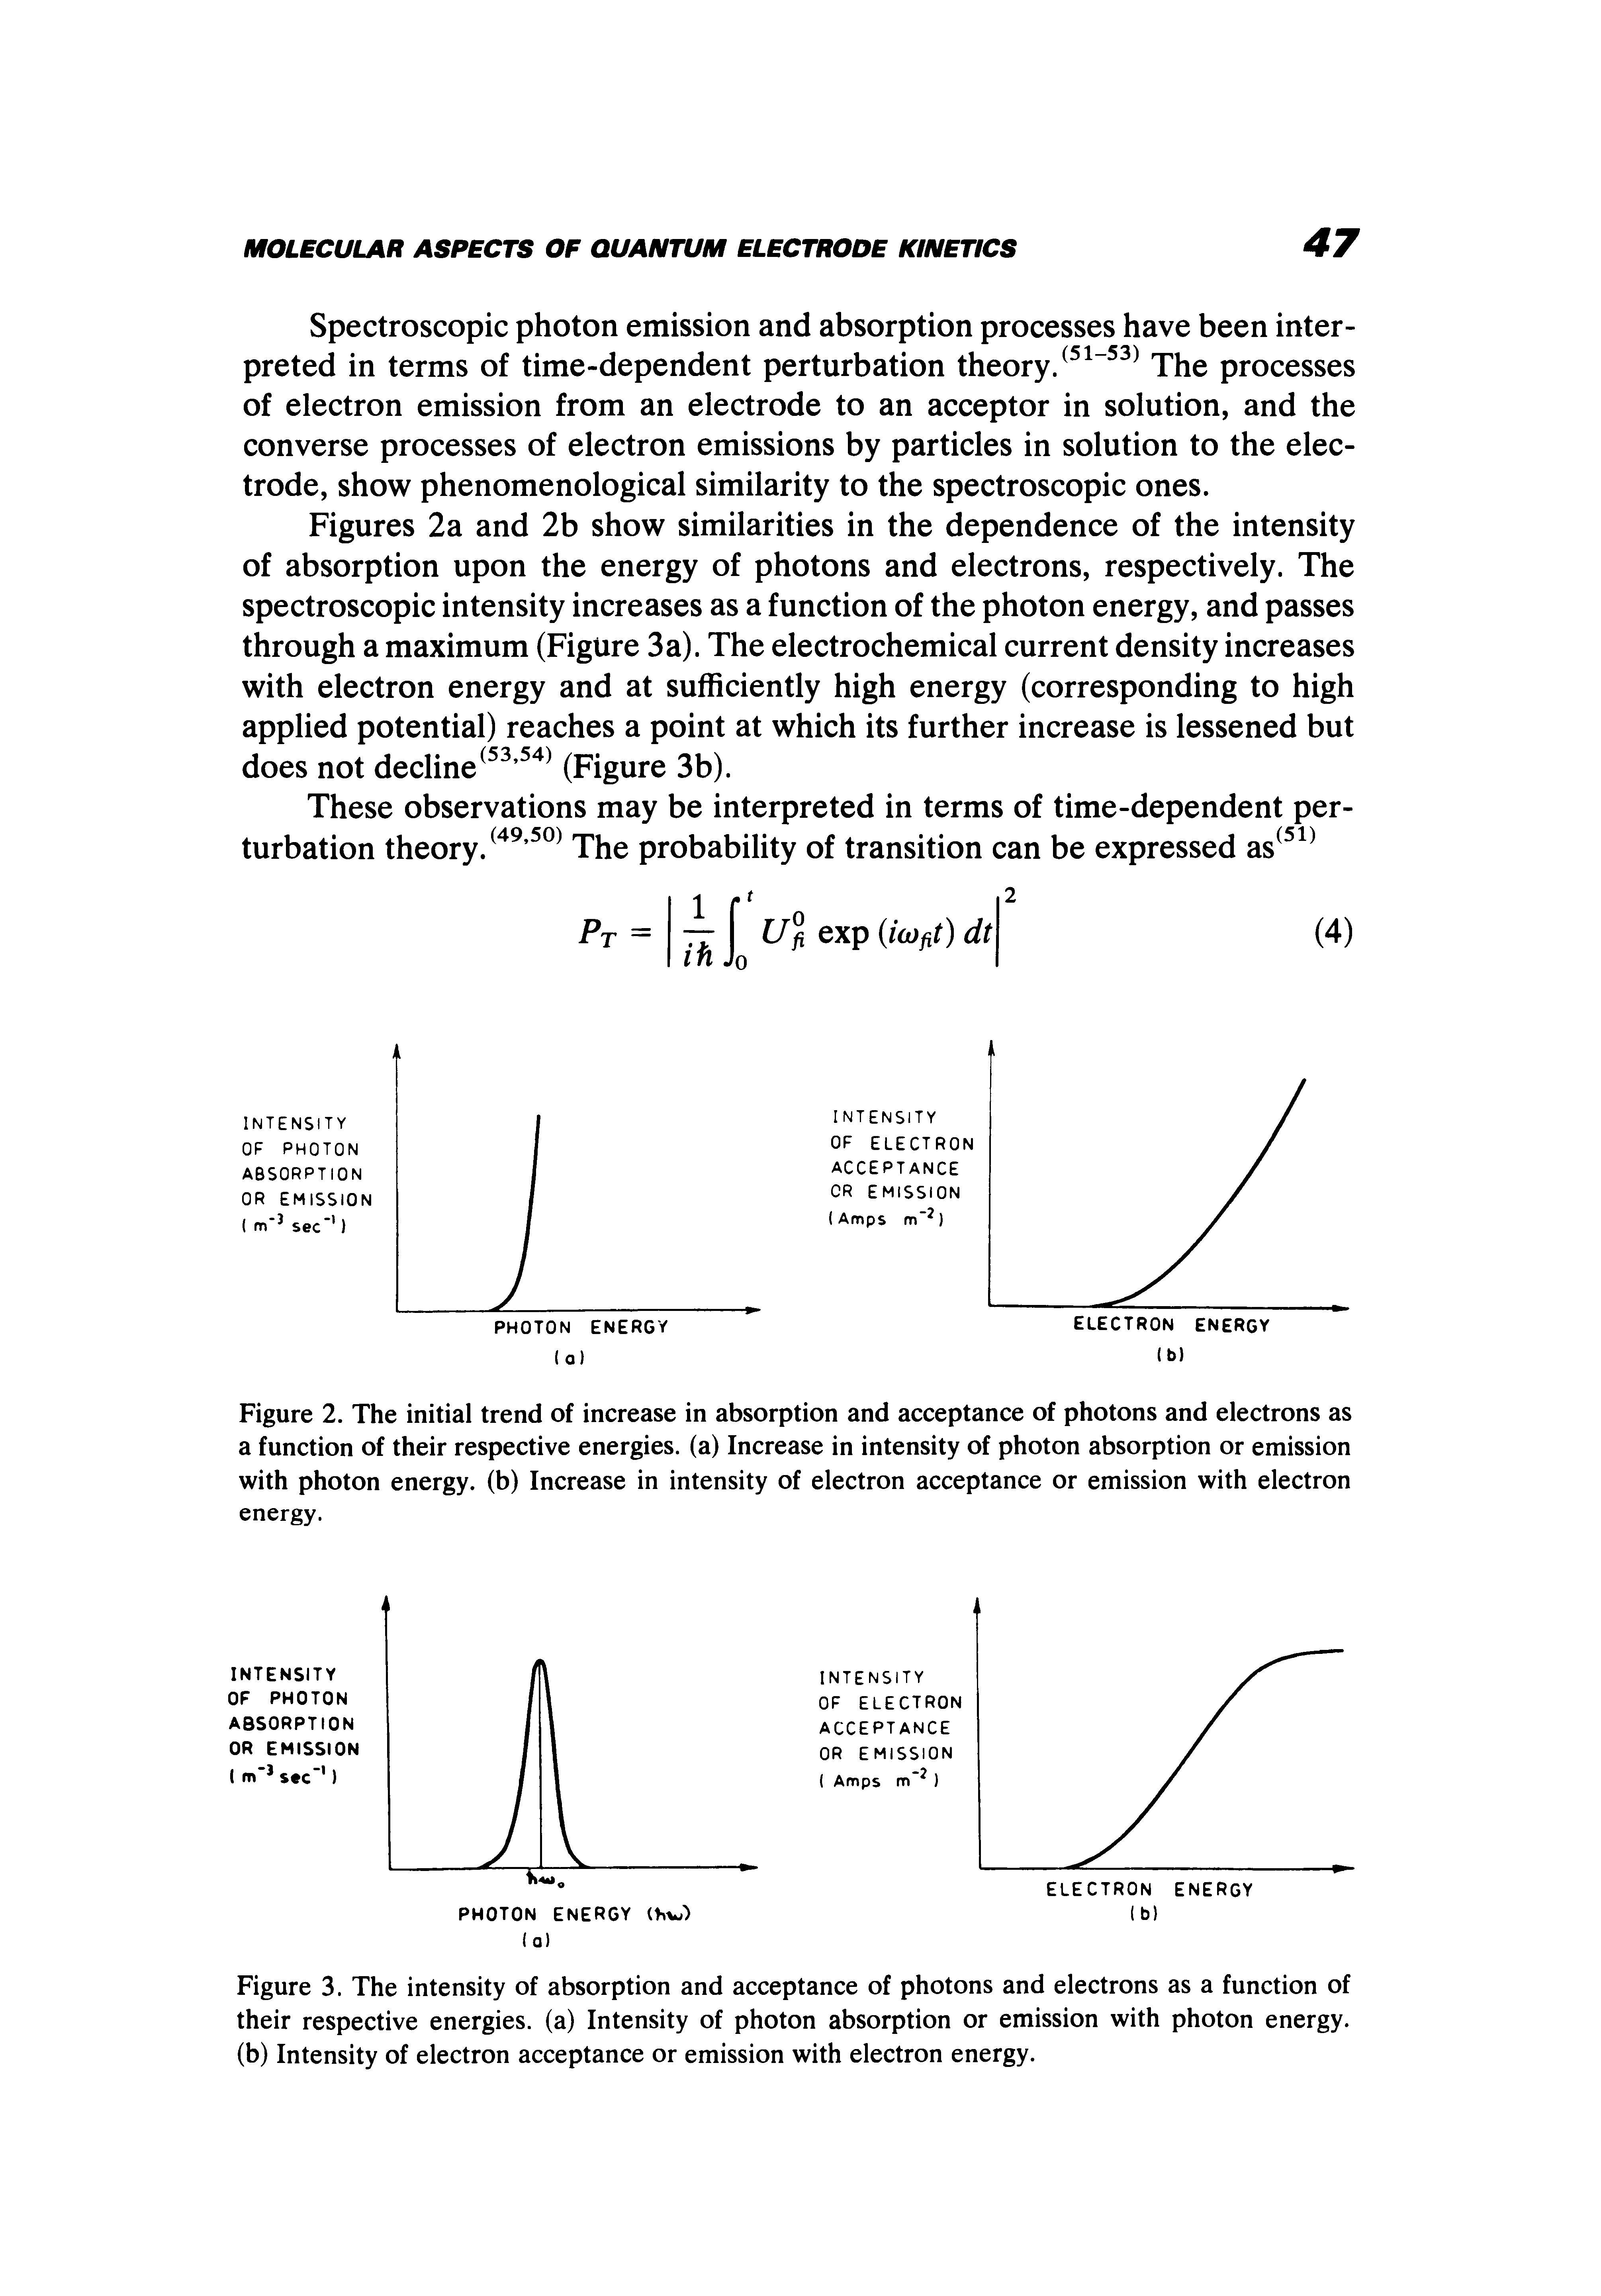 Figure 2. The initial trend of increase in absorption and acceptance of photons and electrons as a function of their respective energies, (a) Increase in intensity of photon absorption or emission with photon energy, (b) Increase in intensity of electron acceptance or emission with electron energy.